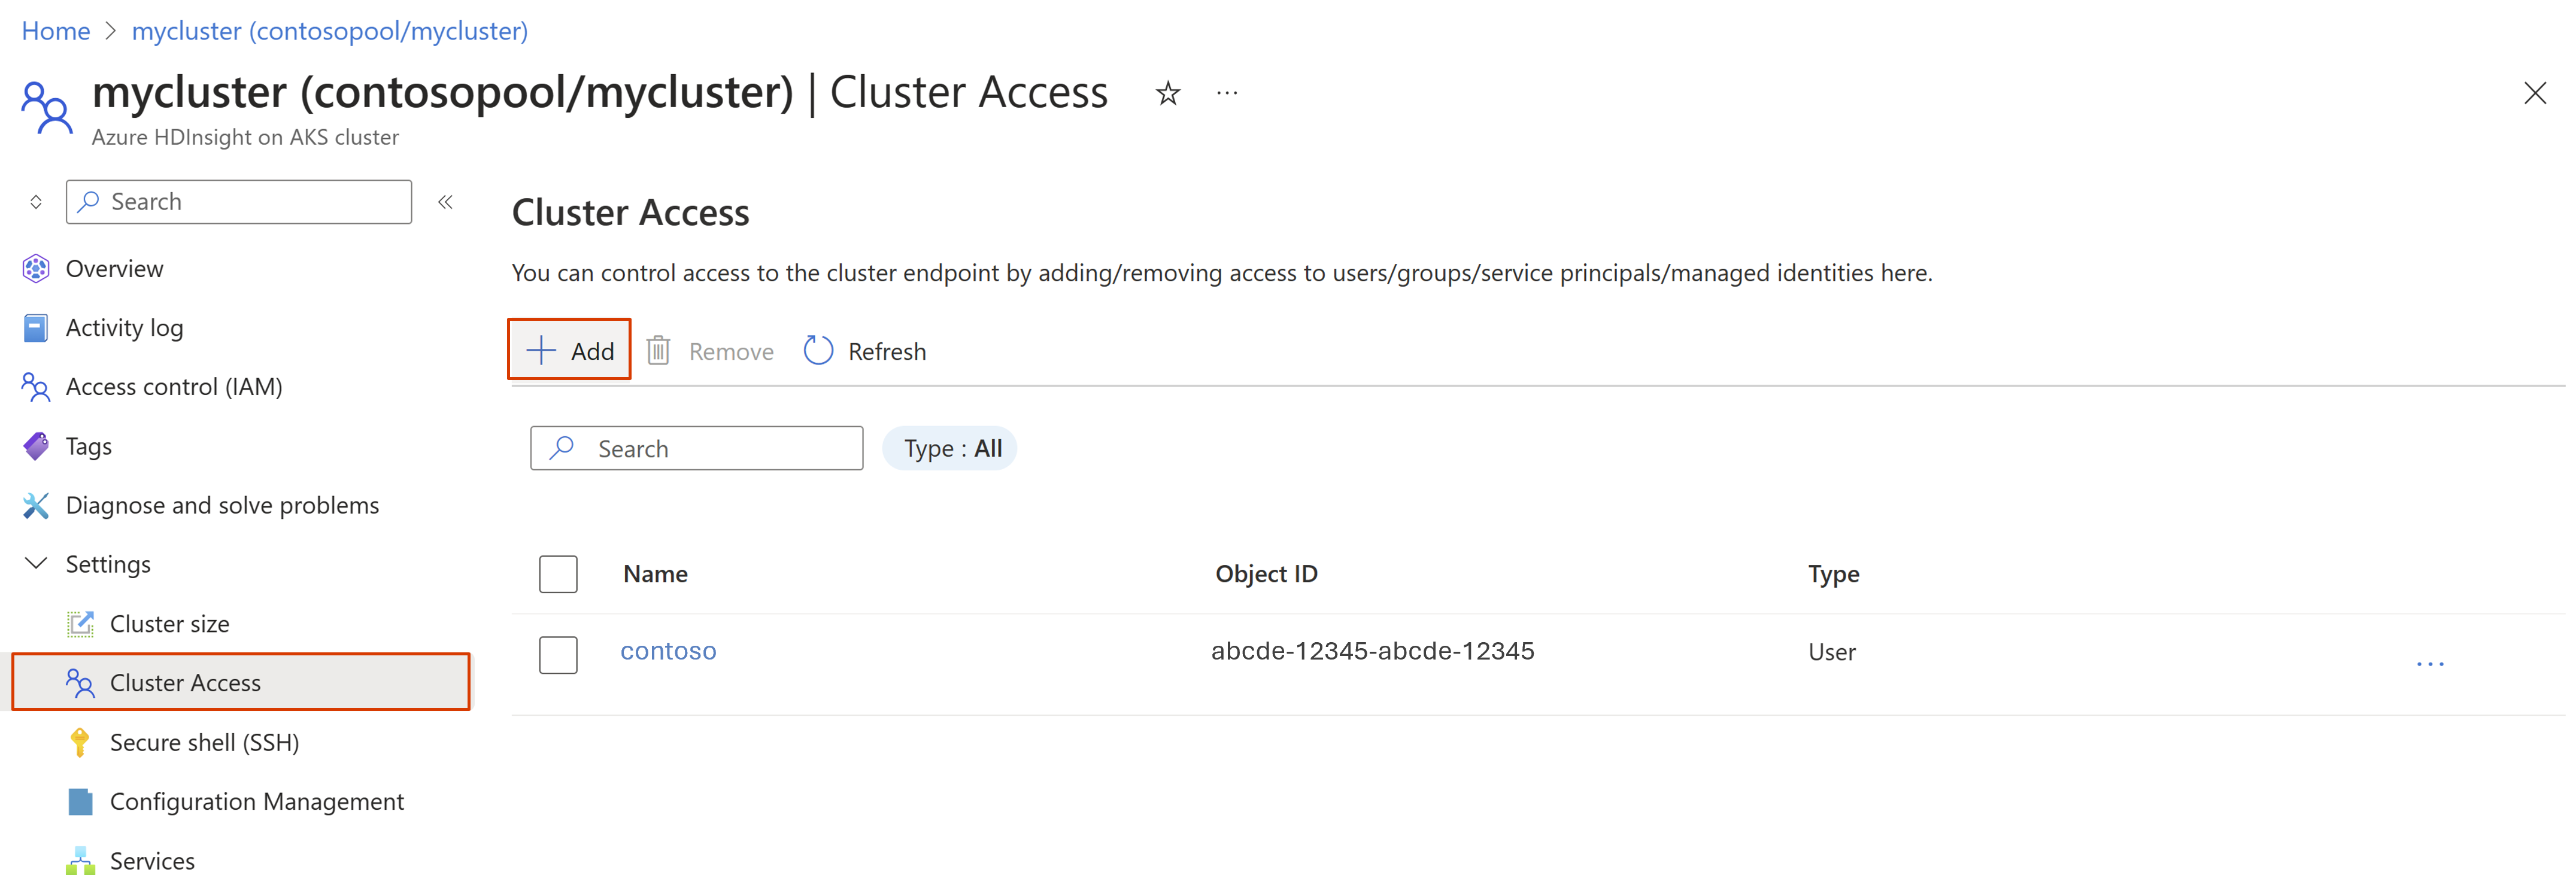 Screenshot showing how to provide access to a user for cluster access.